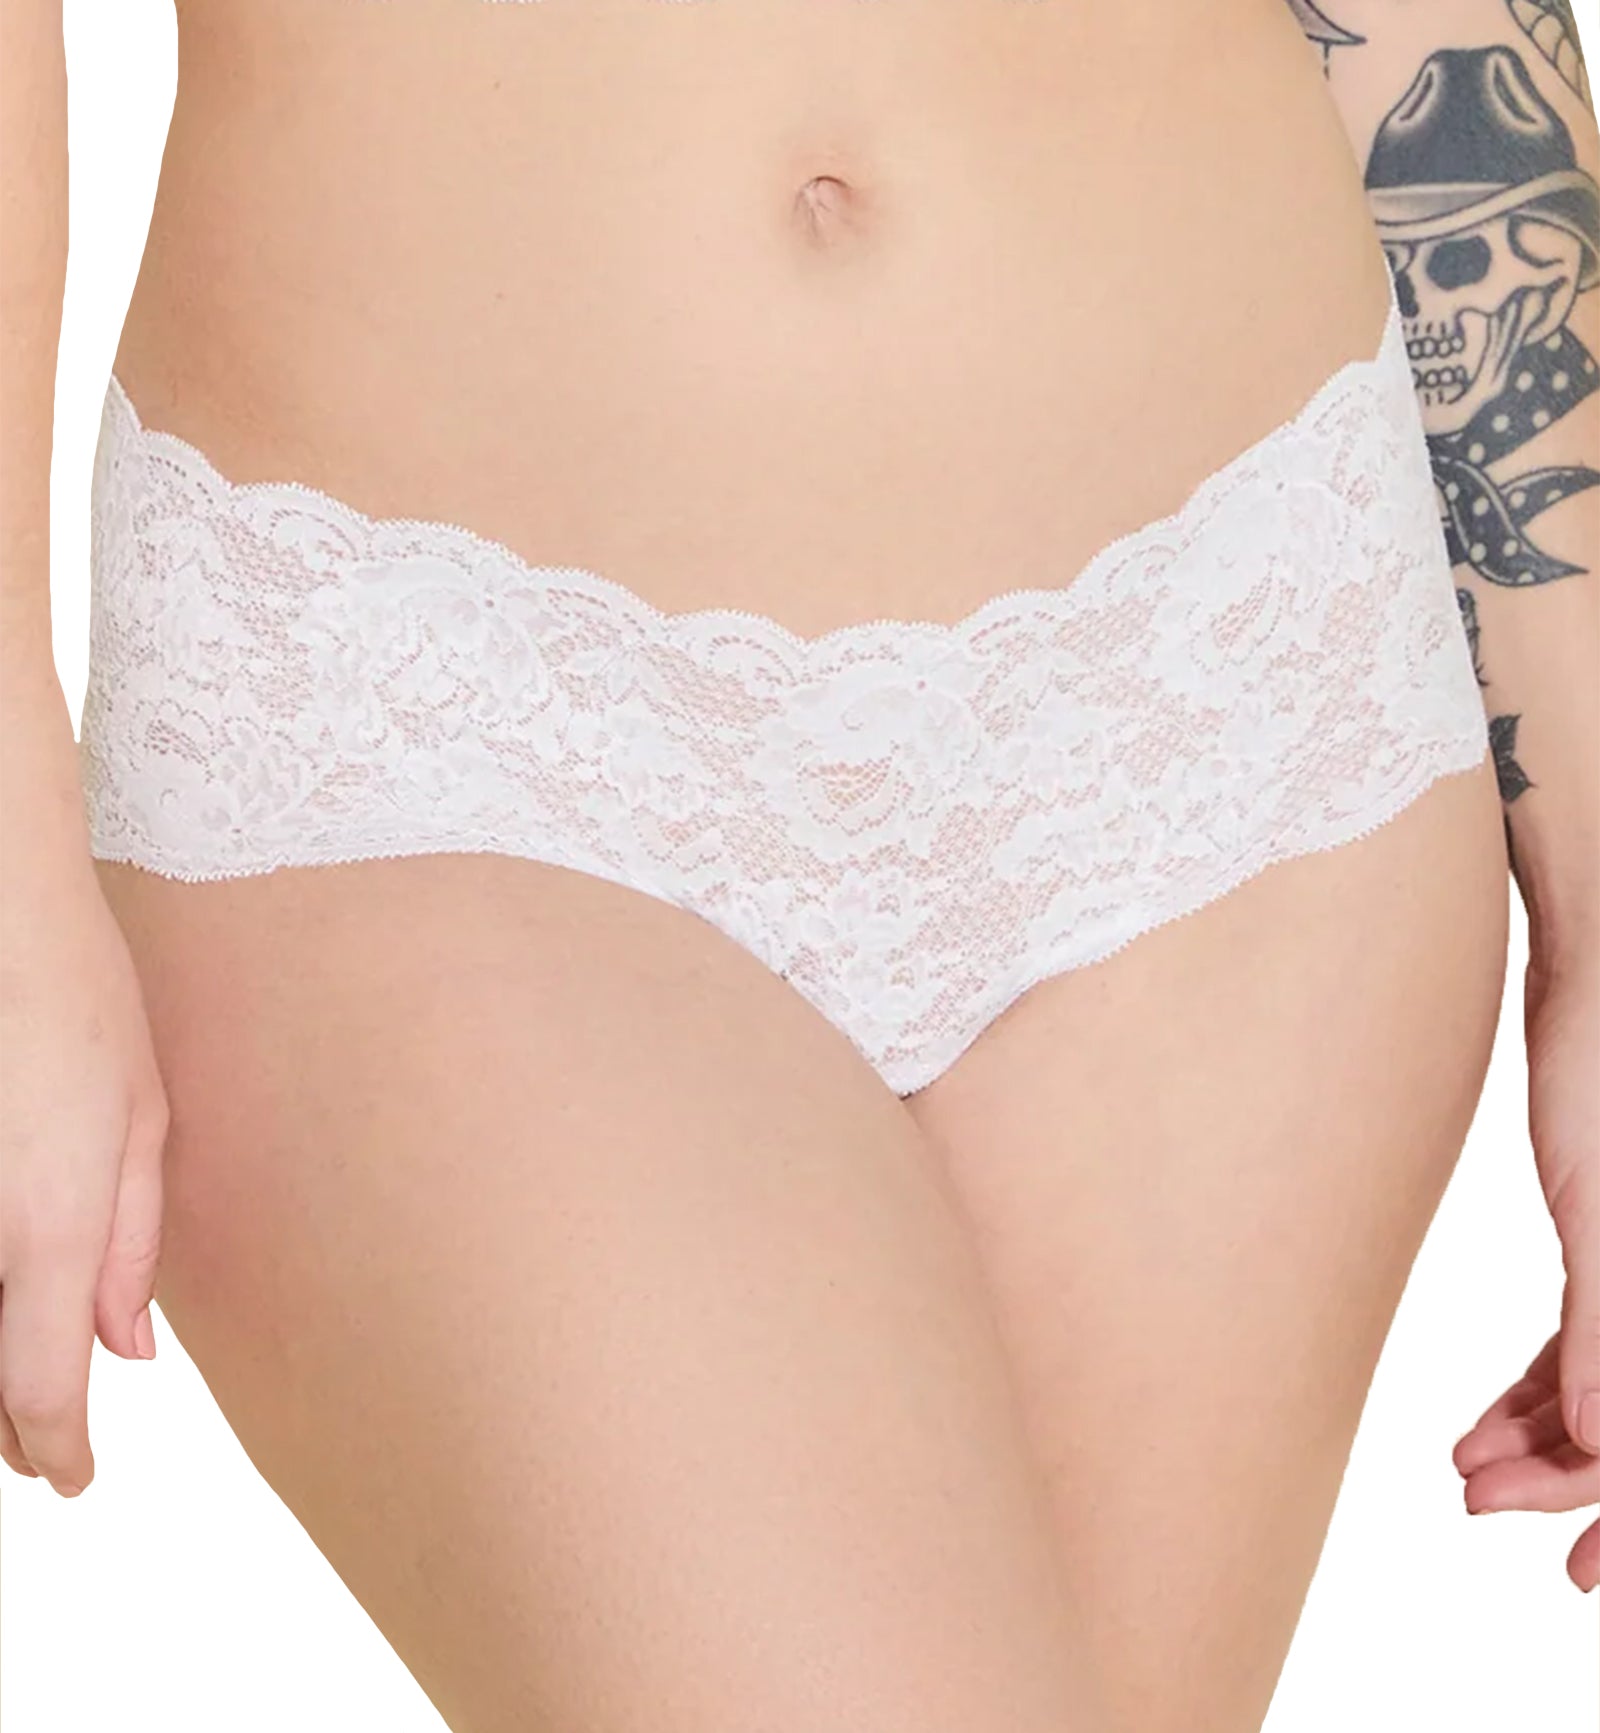 Cosabella Never Say Never Hottie Lowrider Hotpant (NEVER07ZL),L/XL,White - White,L/XL